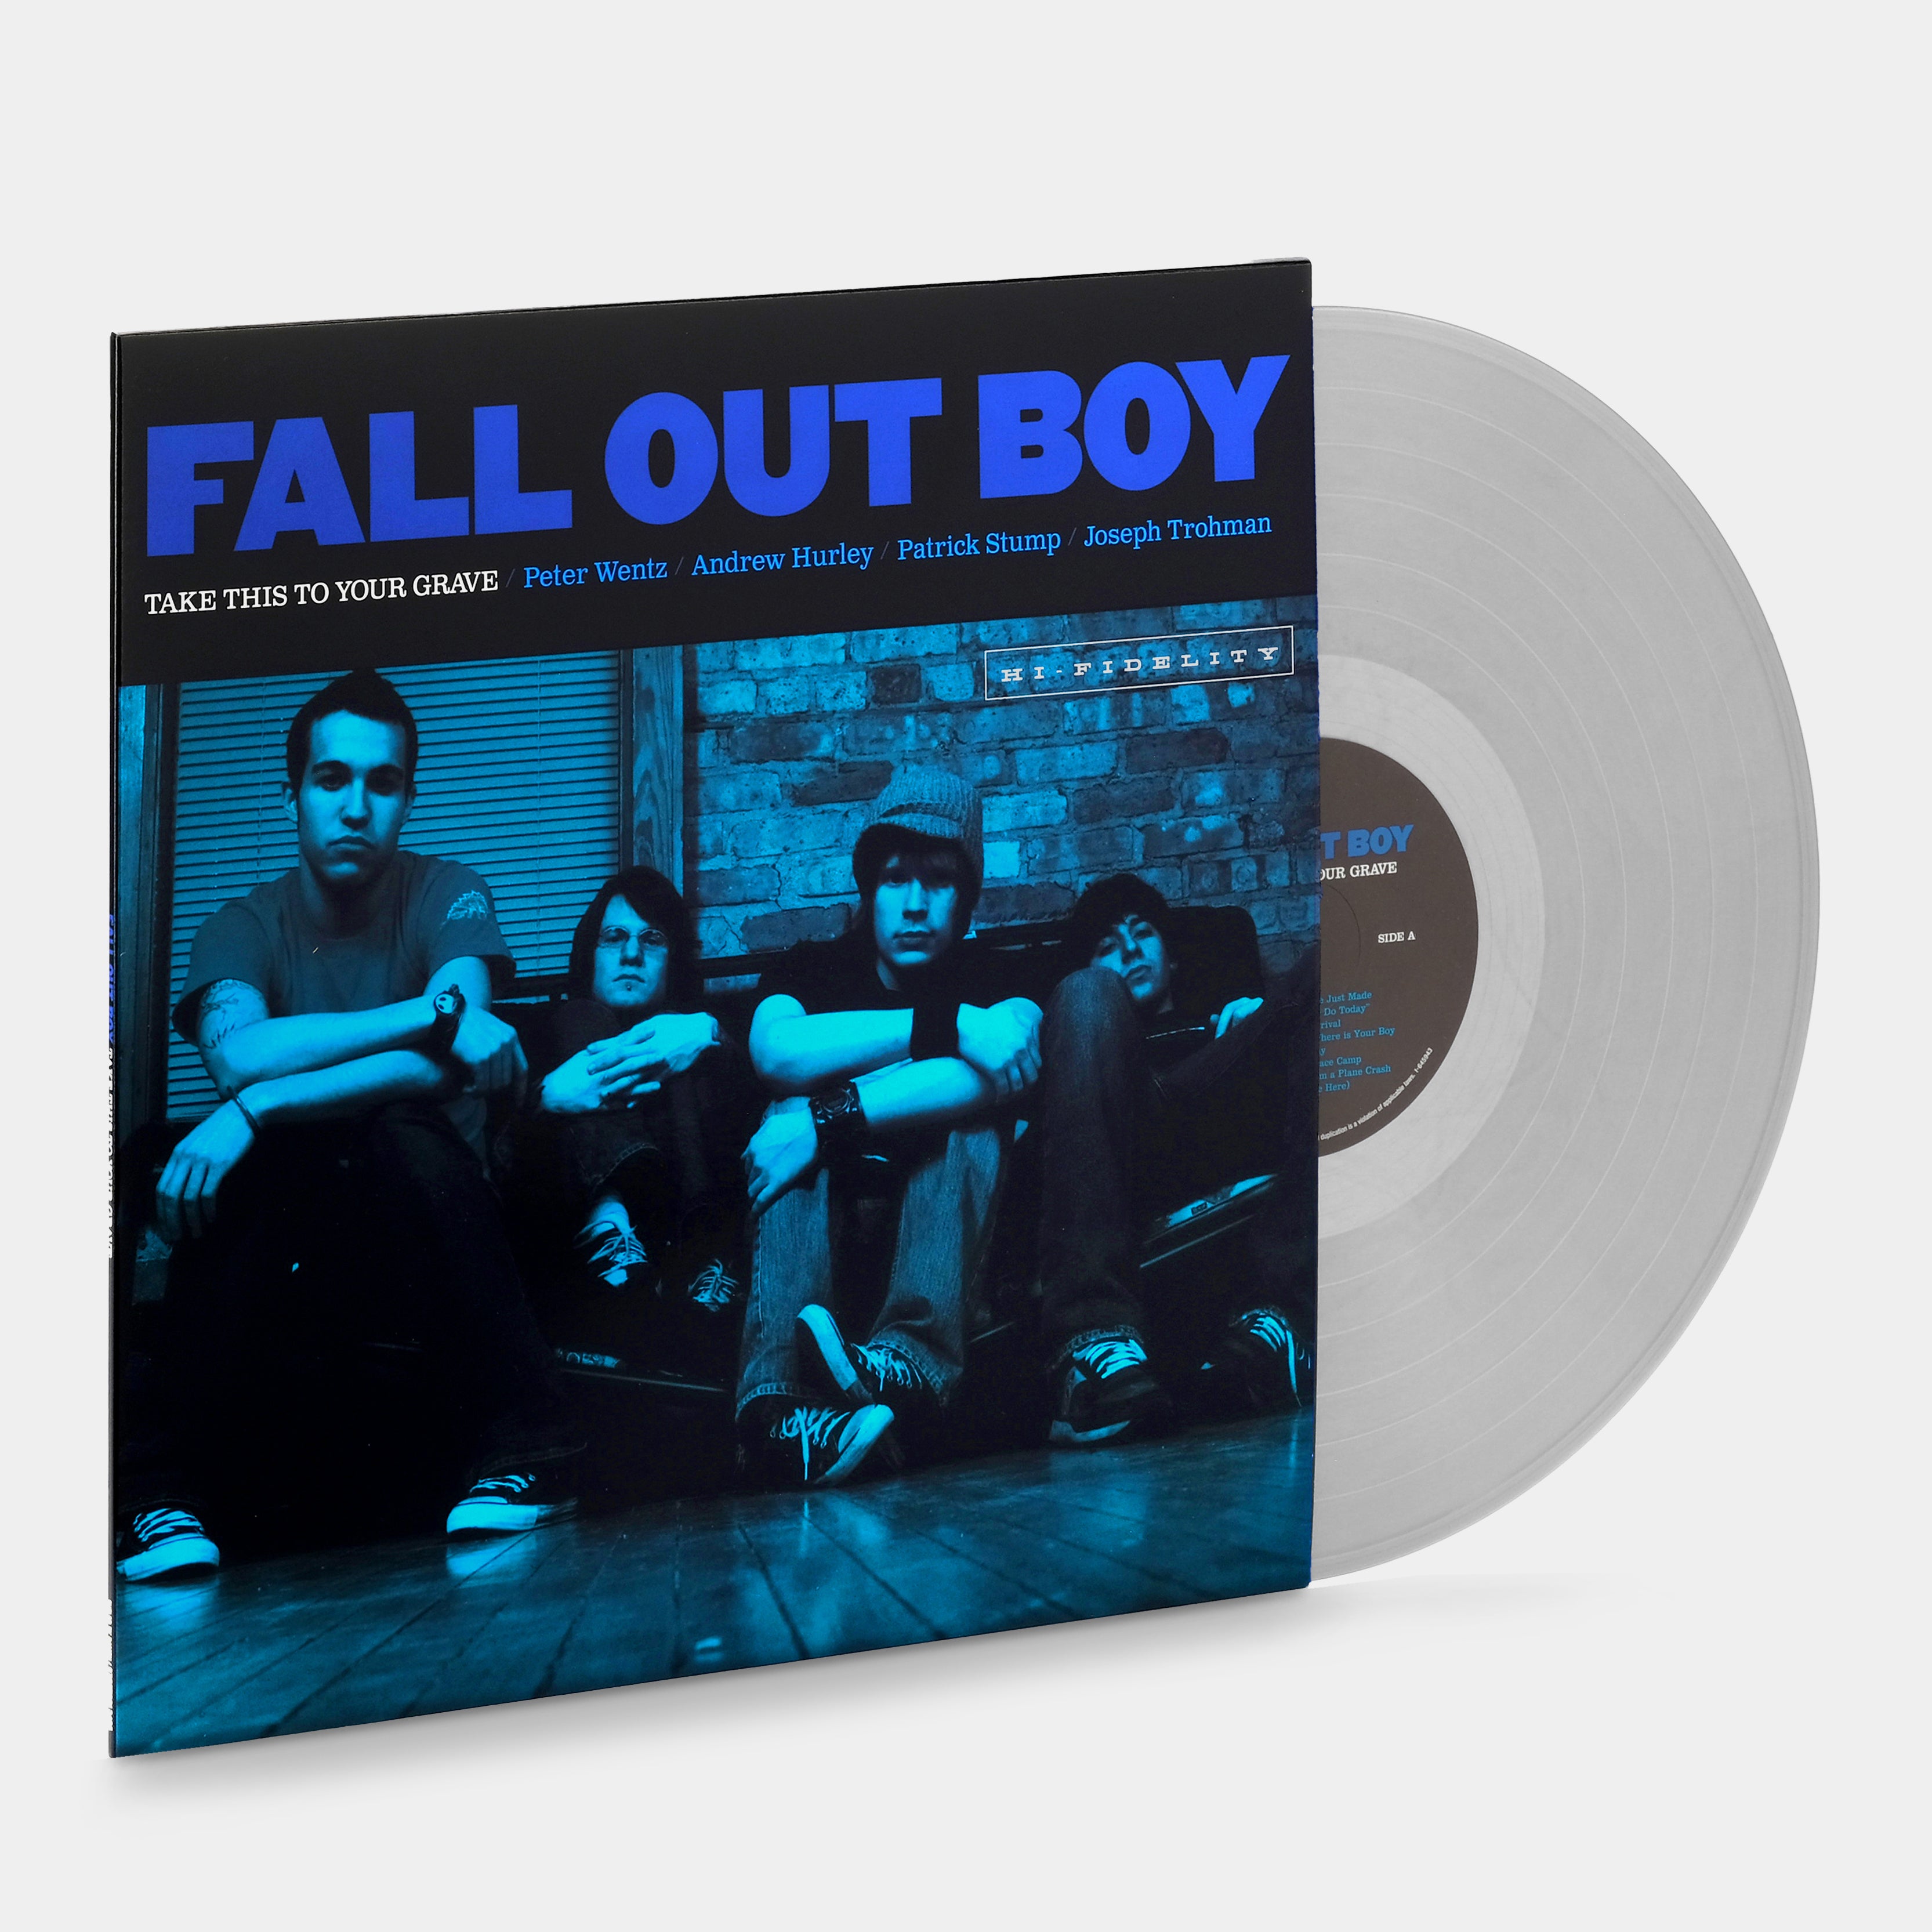 Fall Out Boy - Take This To Your Grave LP Silver Vinyl Record